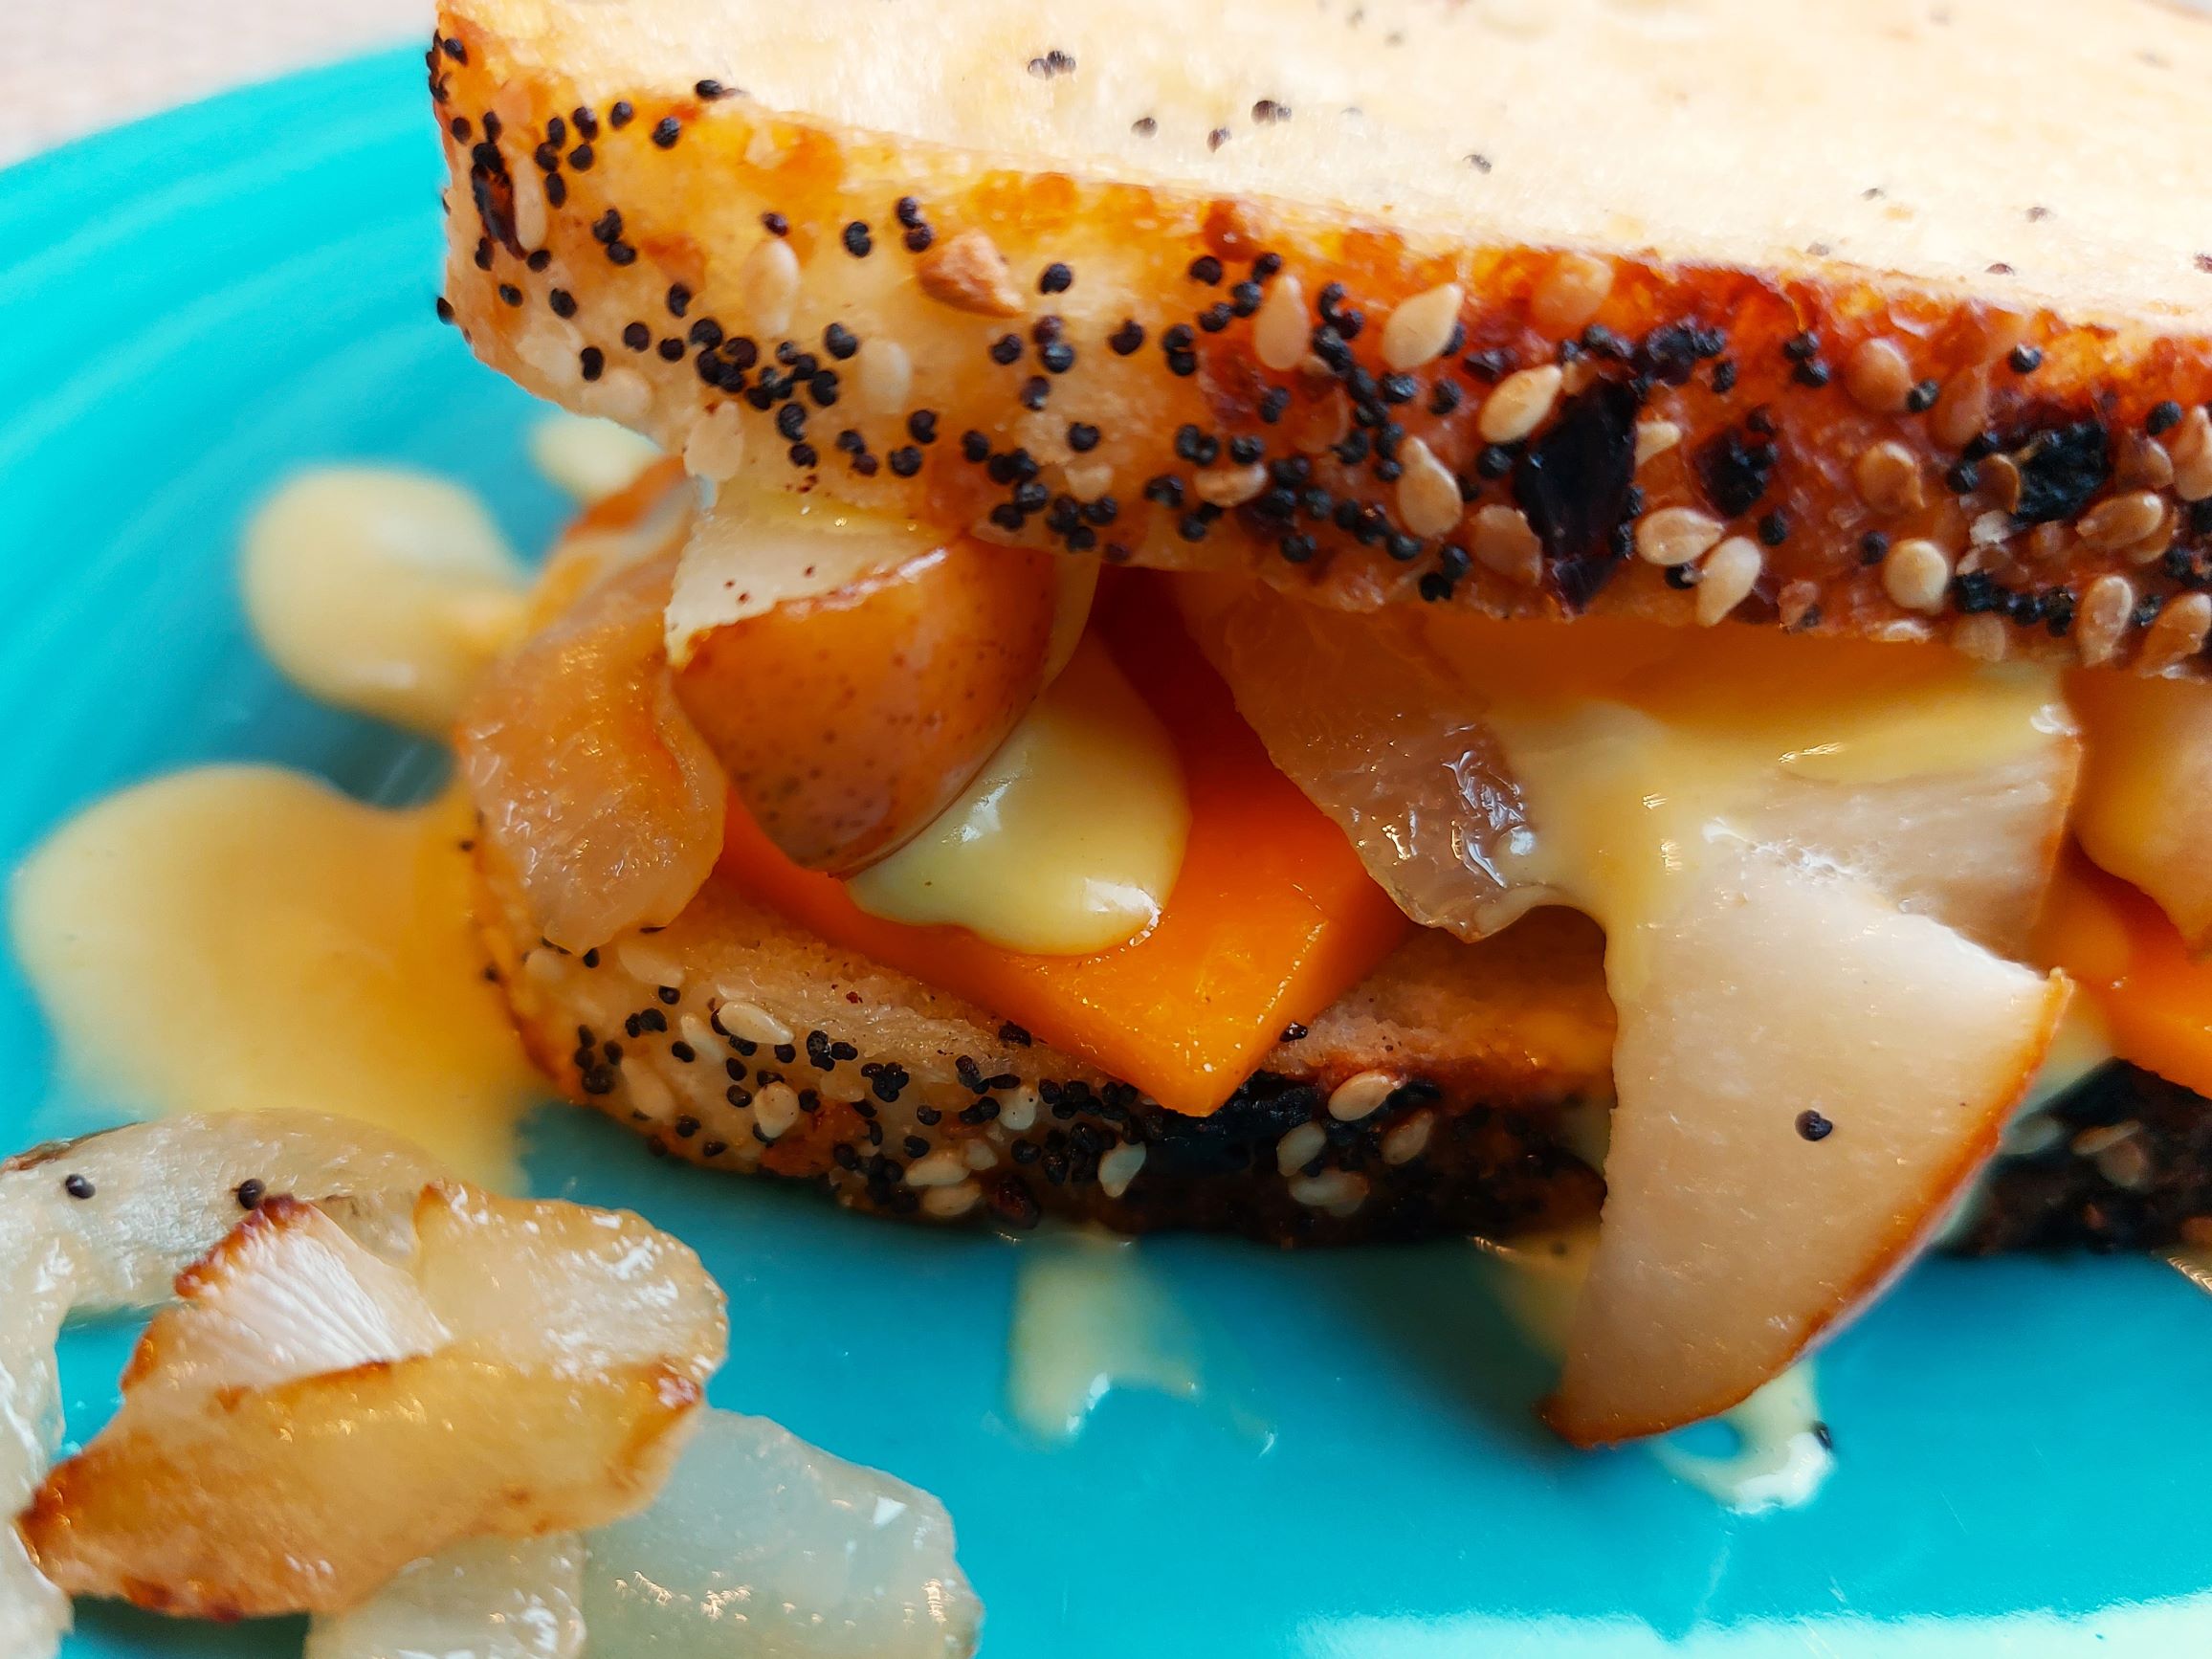 Baked Cheddar Pear Sandwiches